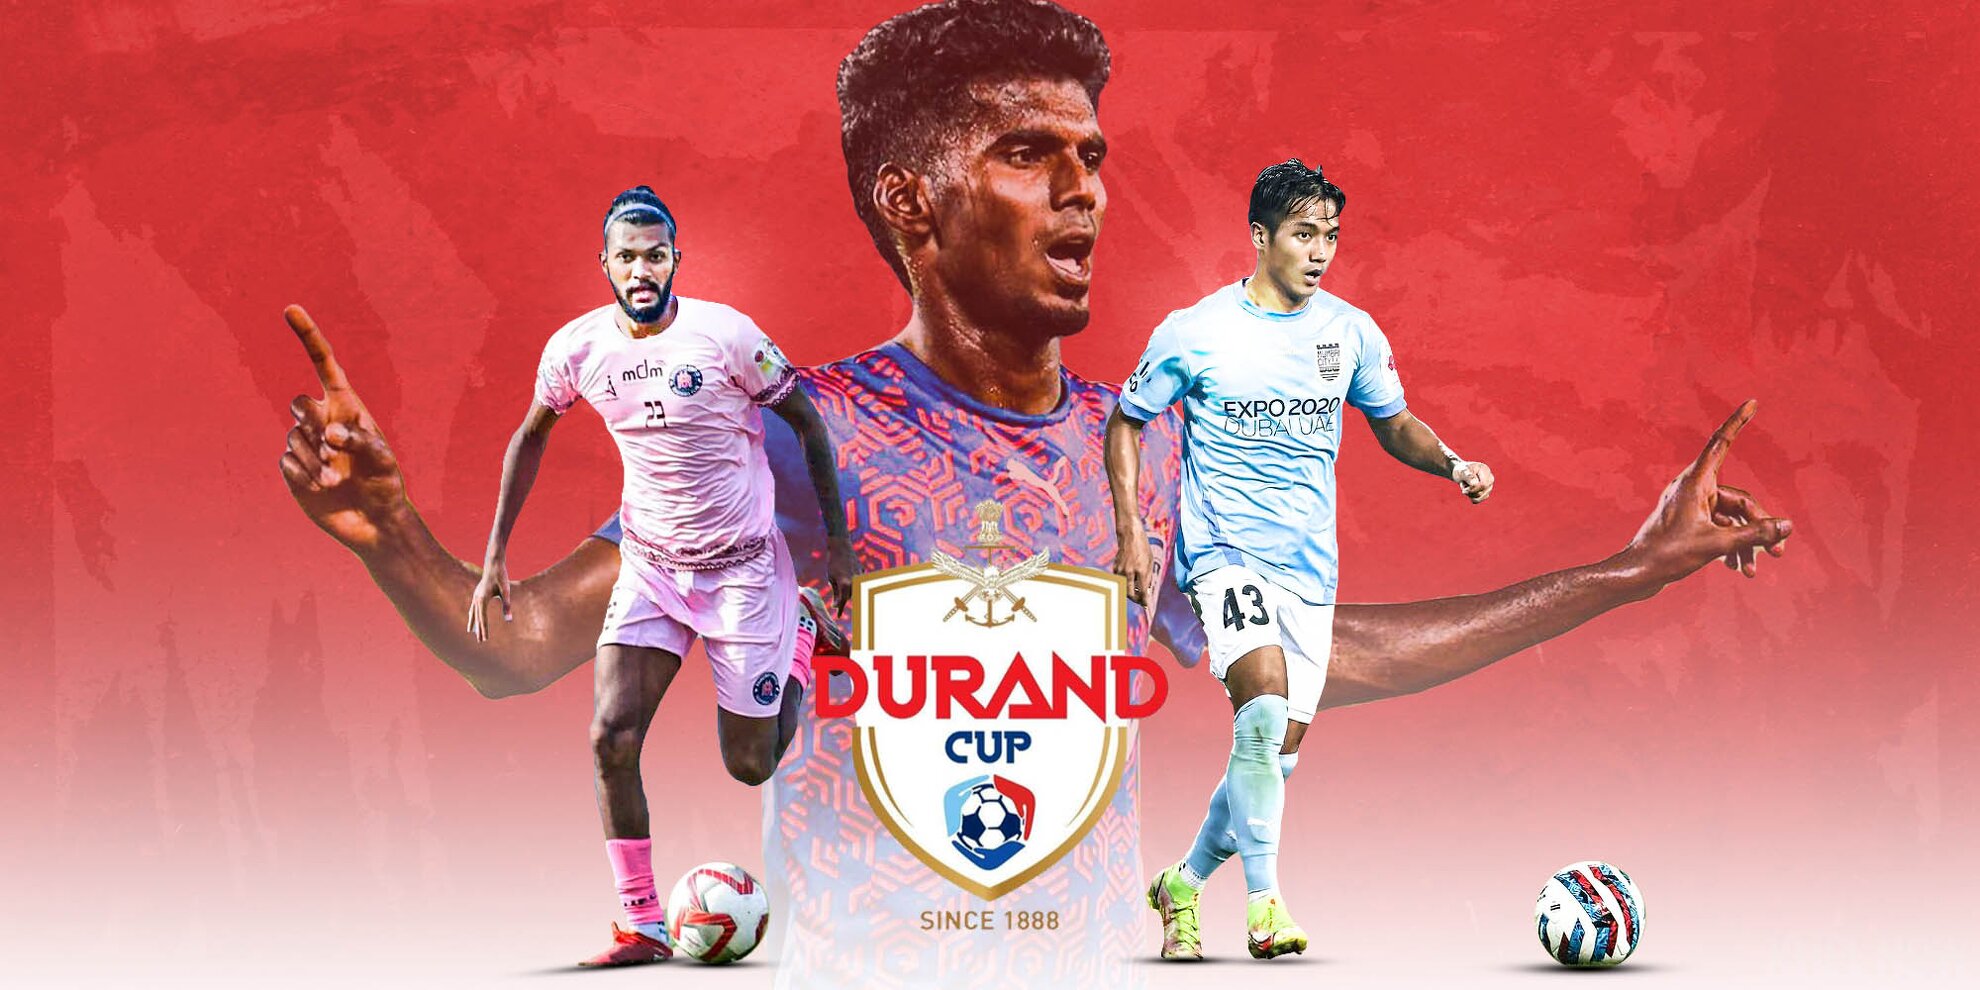 Durand Cup 2022 Team of the Tournament